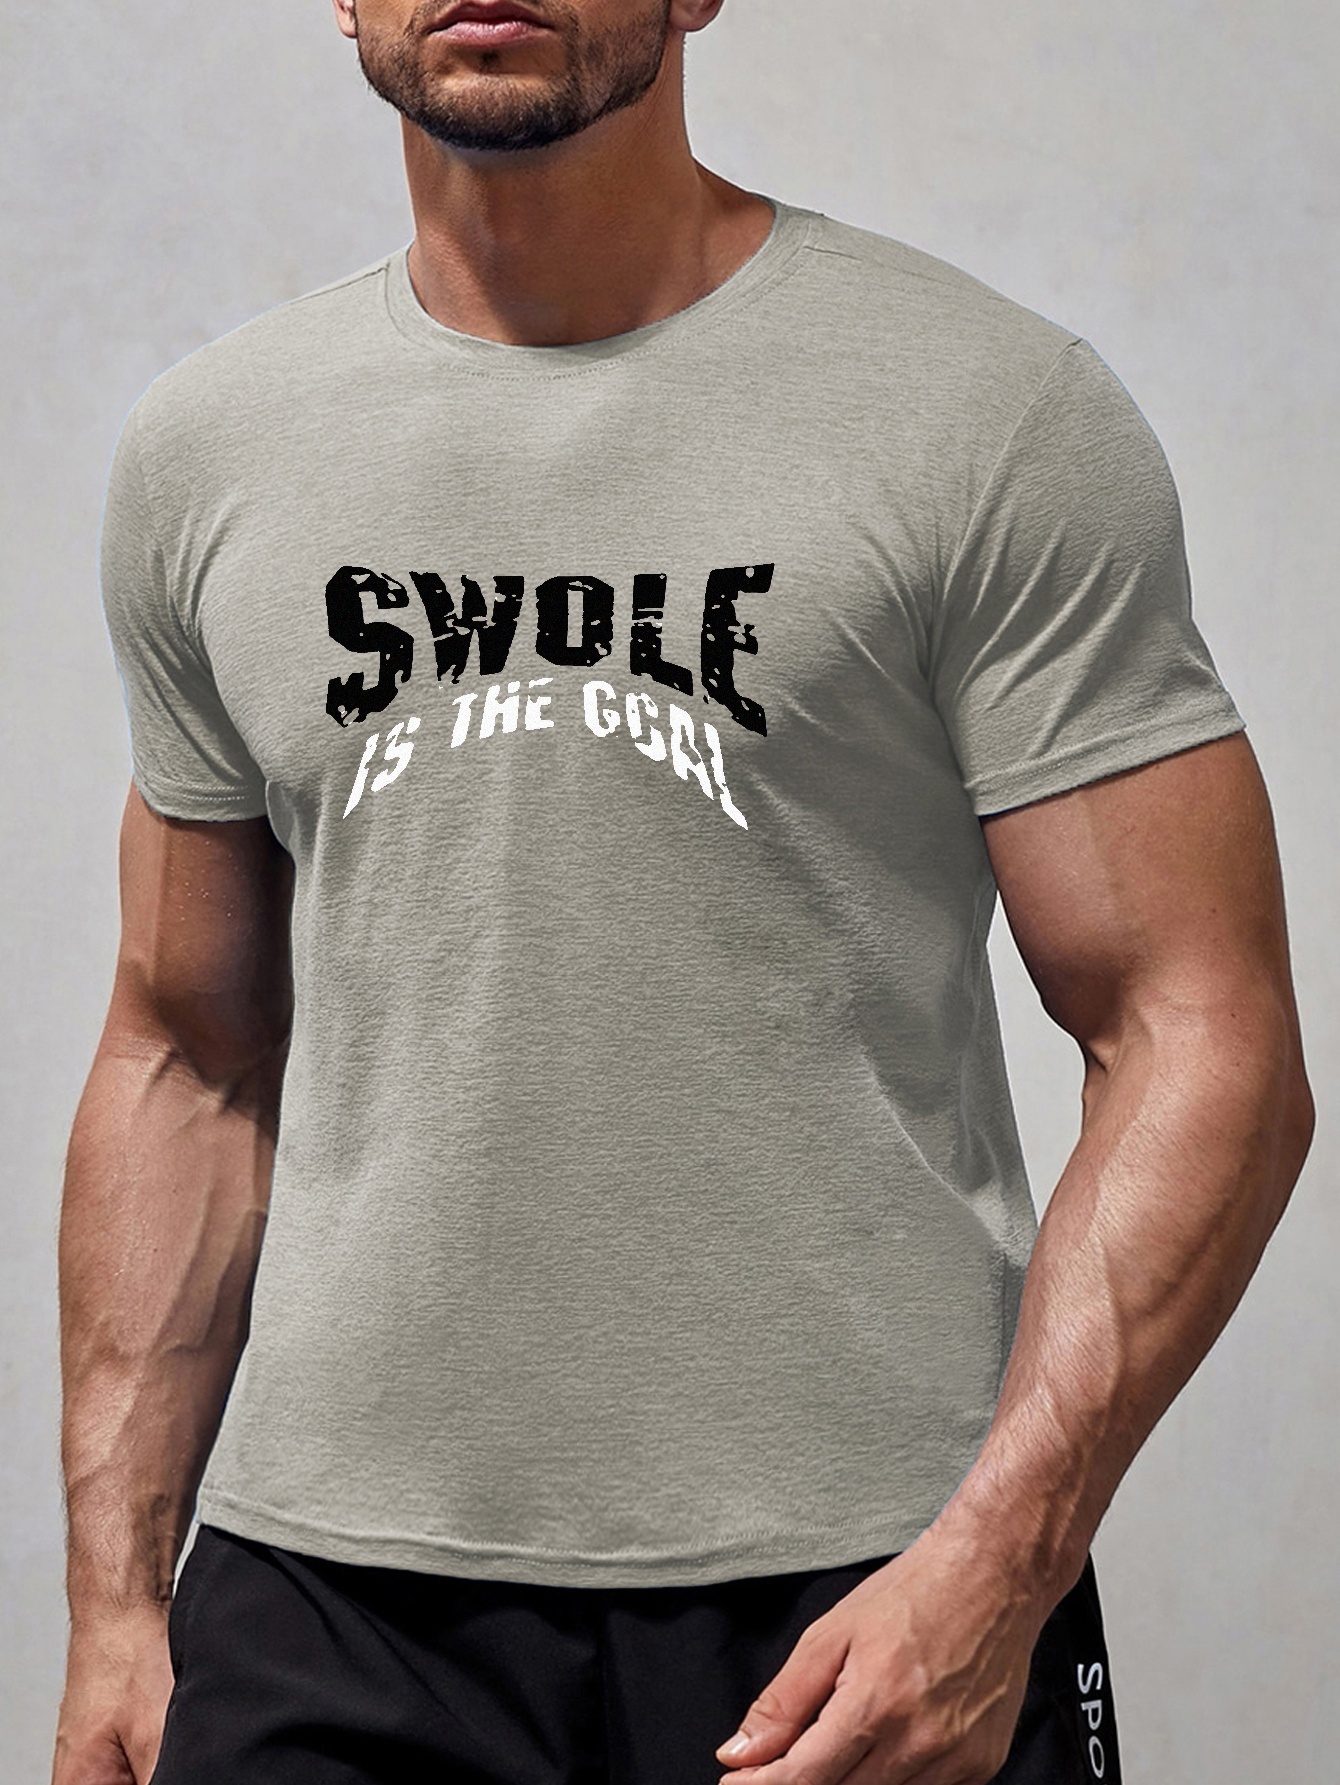 Men's Casual swole Is The Goal Print Graphic Short-sleeve T